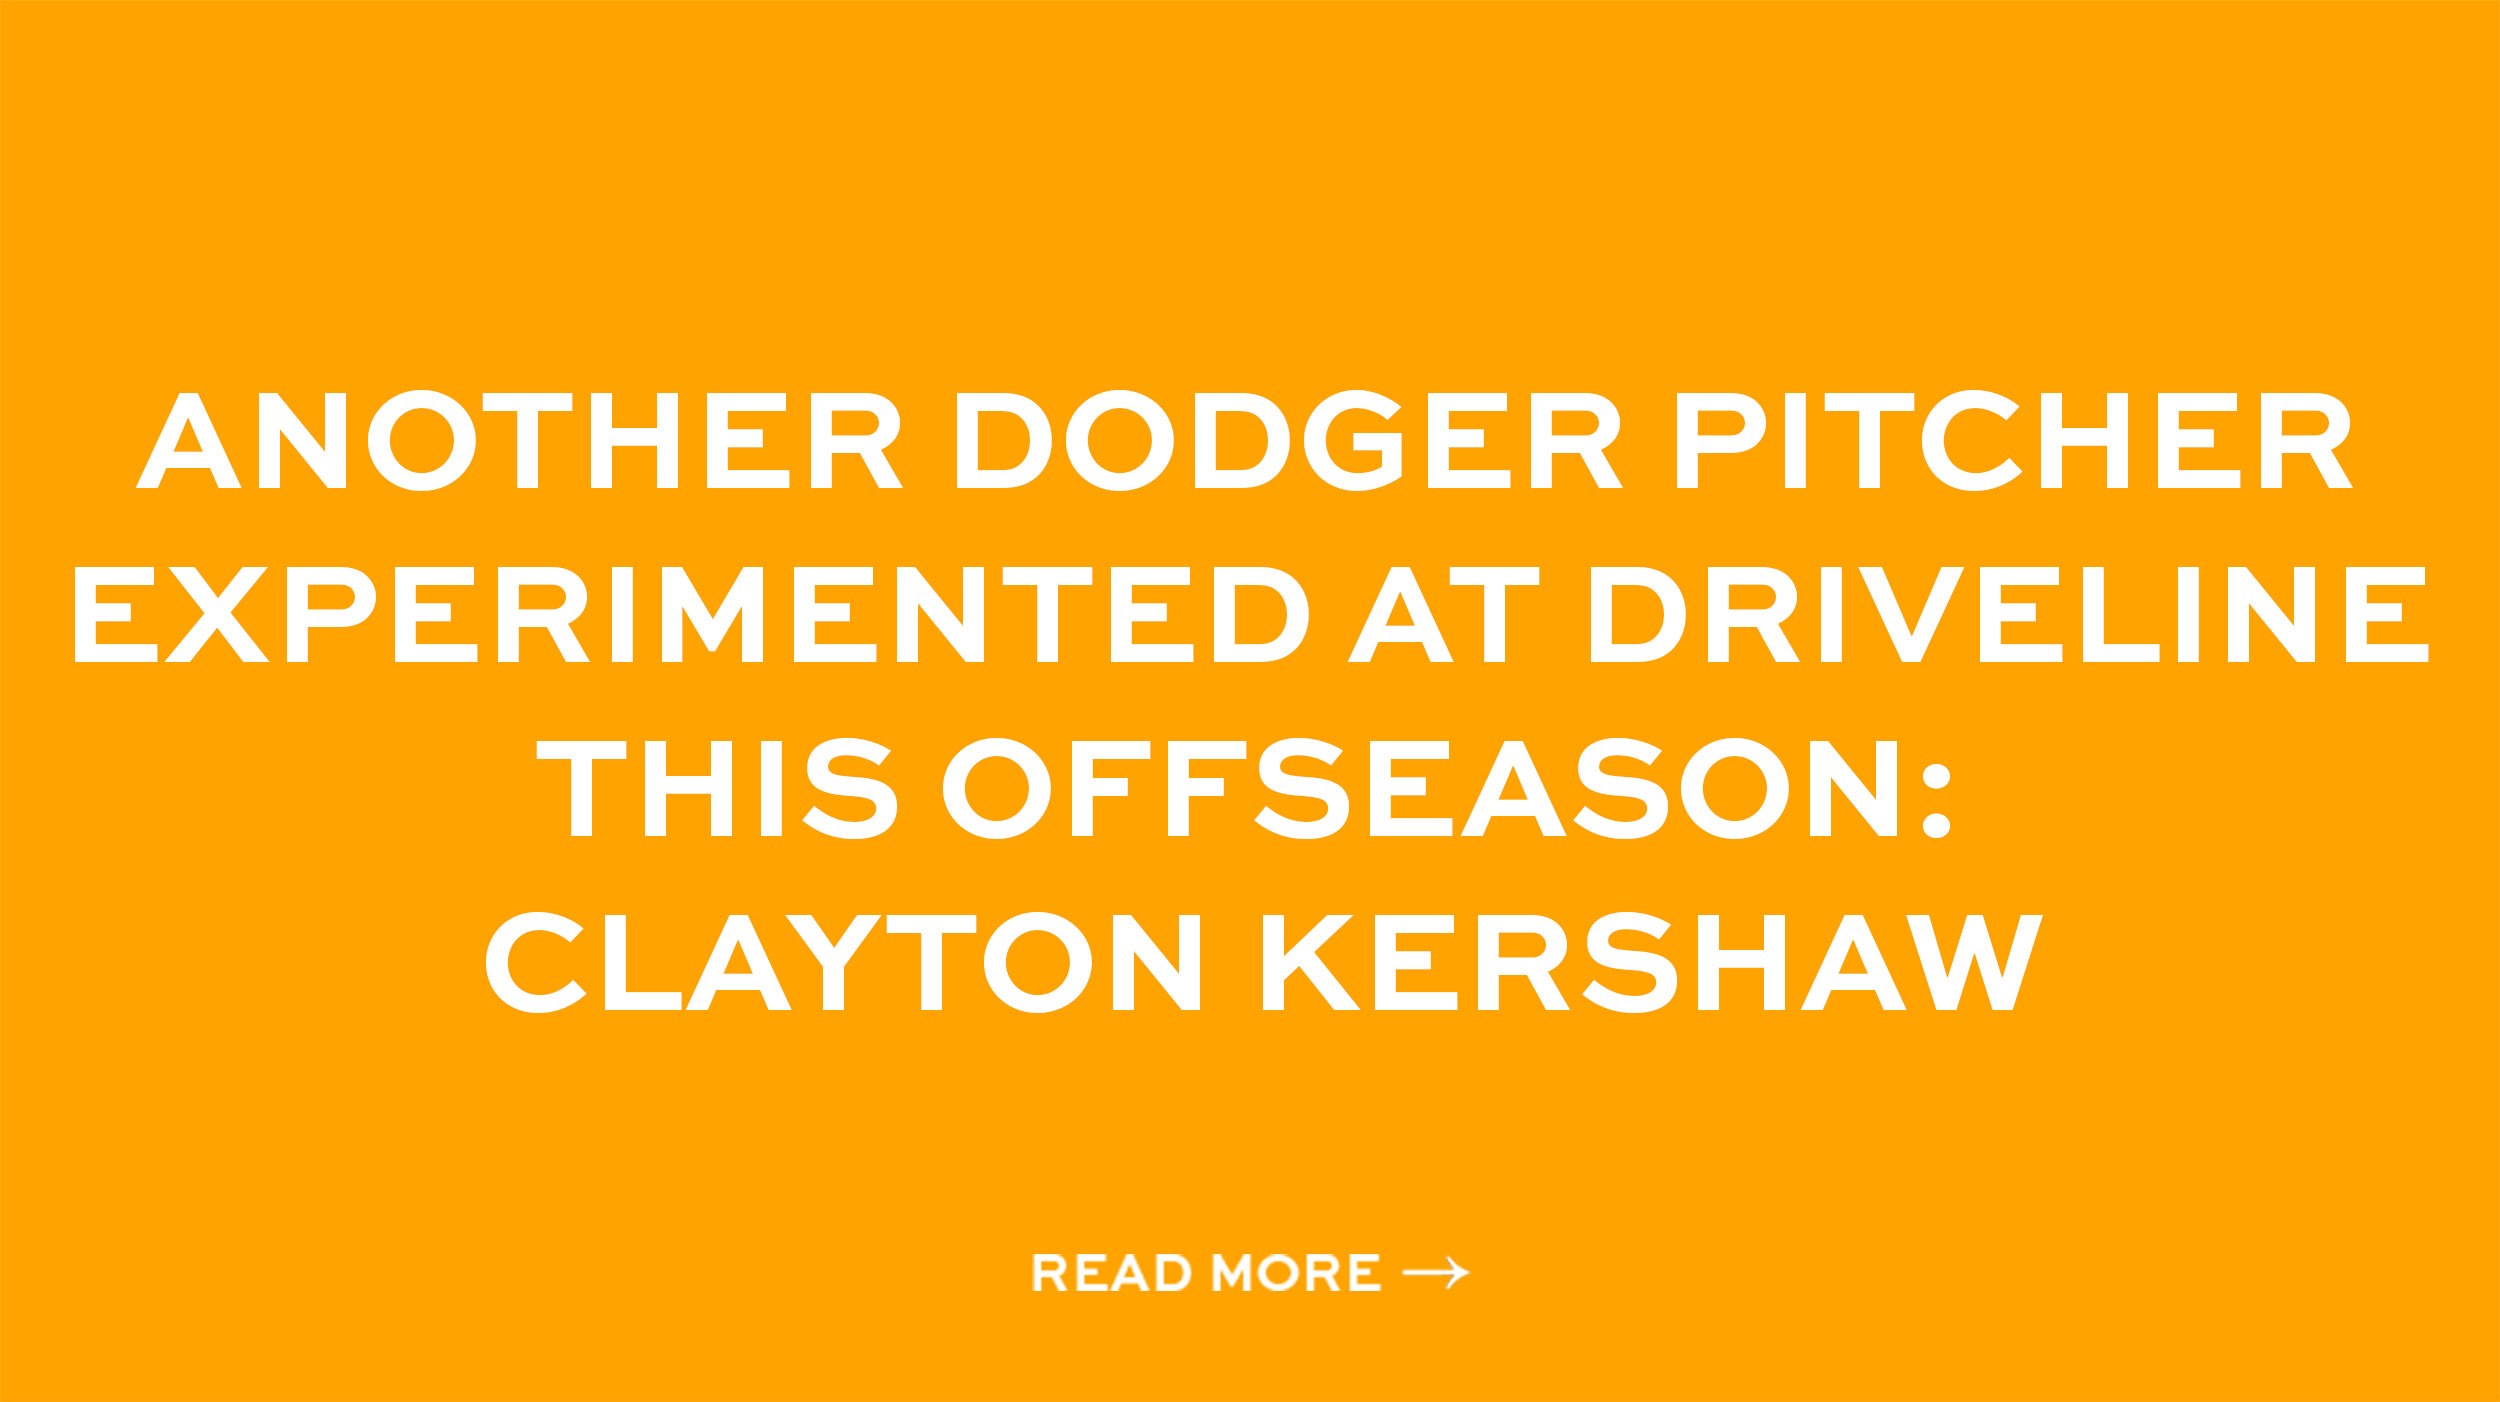 Another Dodger pitcher experimented at Driveline this offseason: Clayton Kershaw